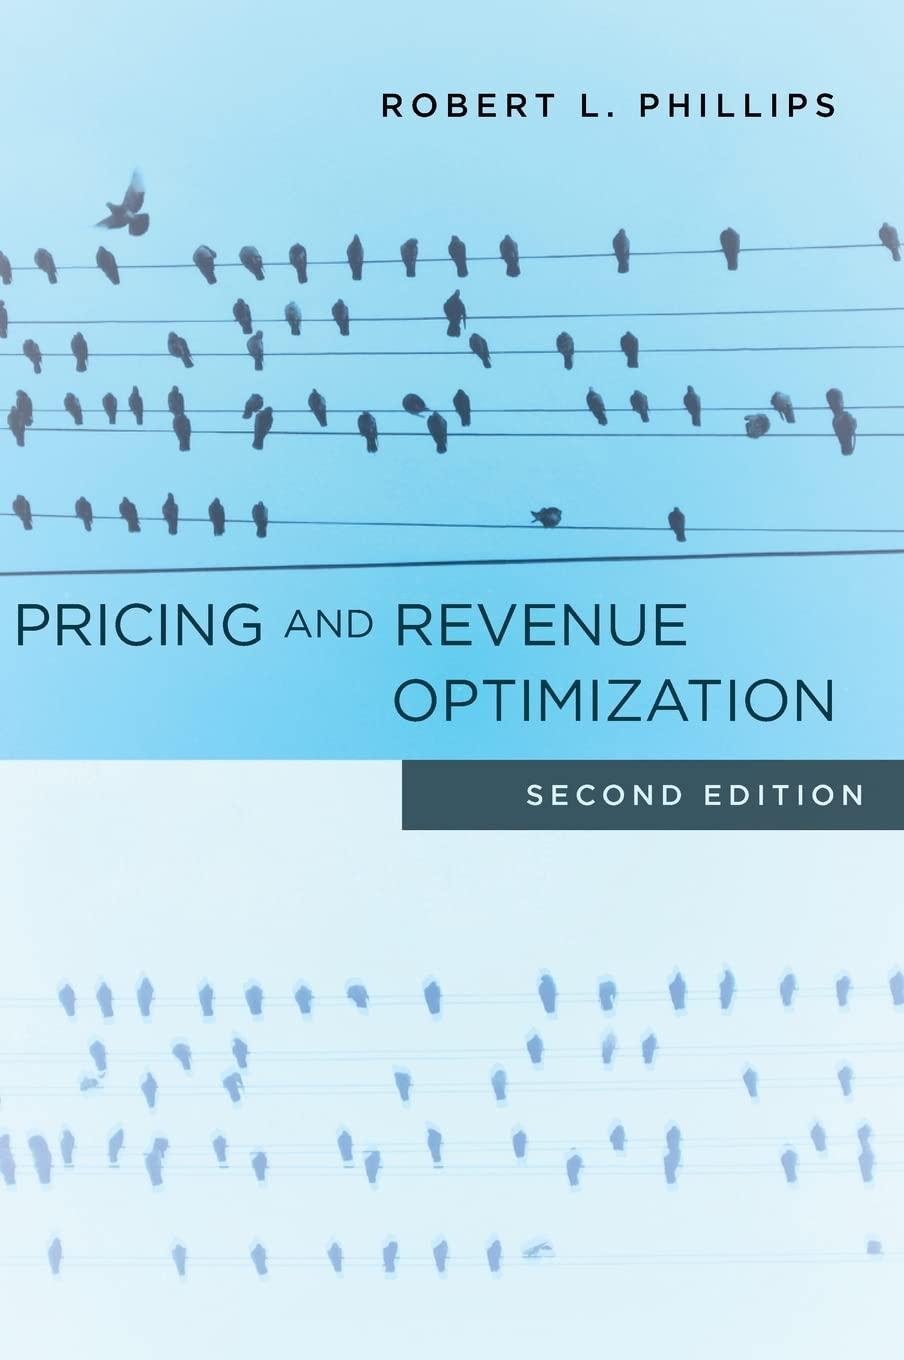 pricing and revenue optimization 2nd edition robert l. phillips 1503610004, 978-1503610002